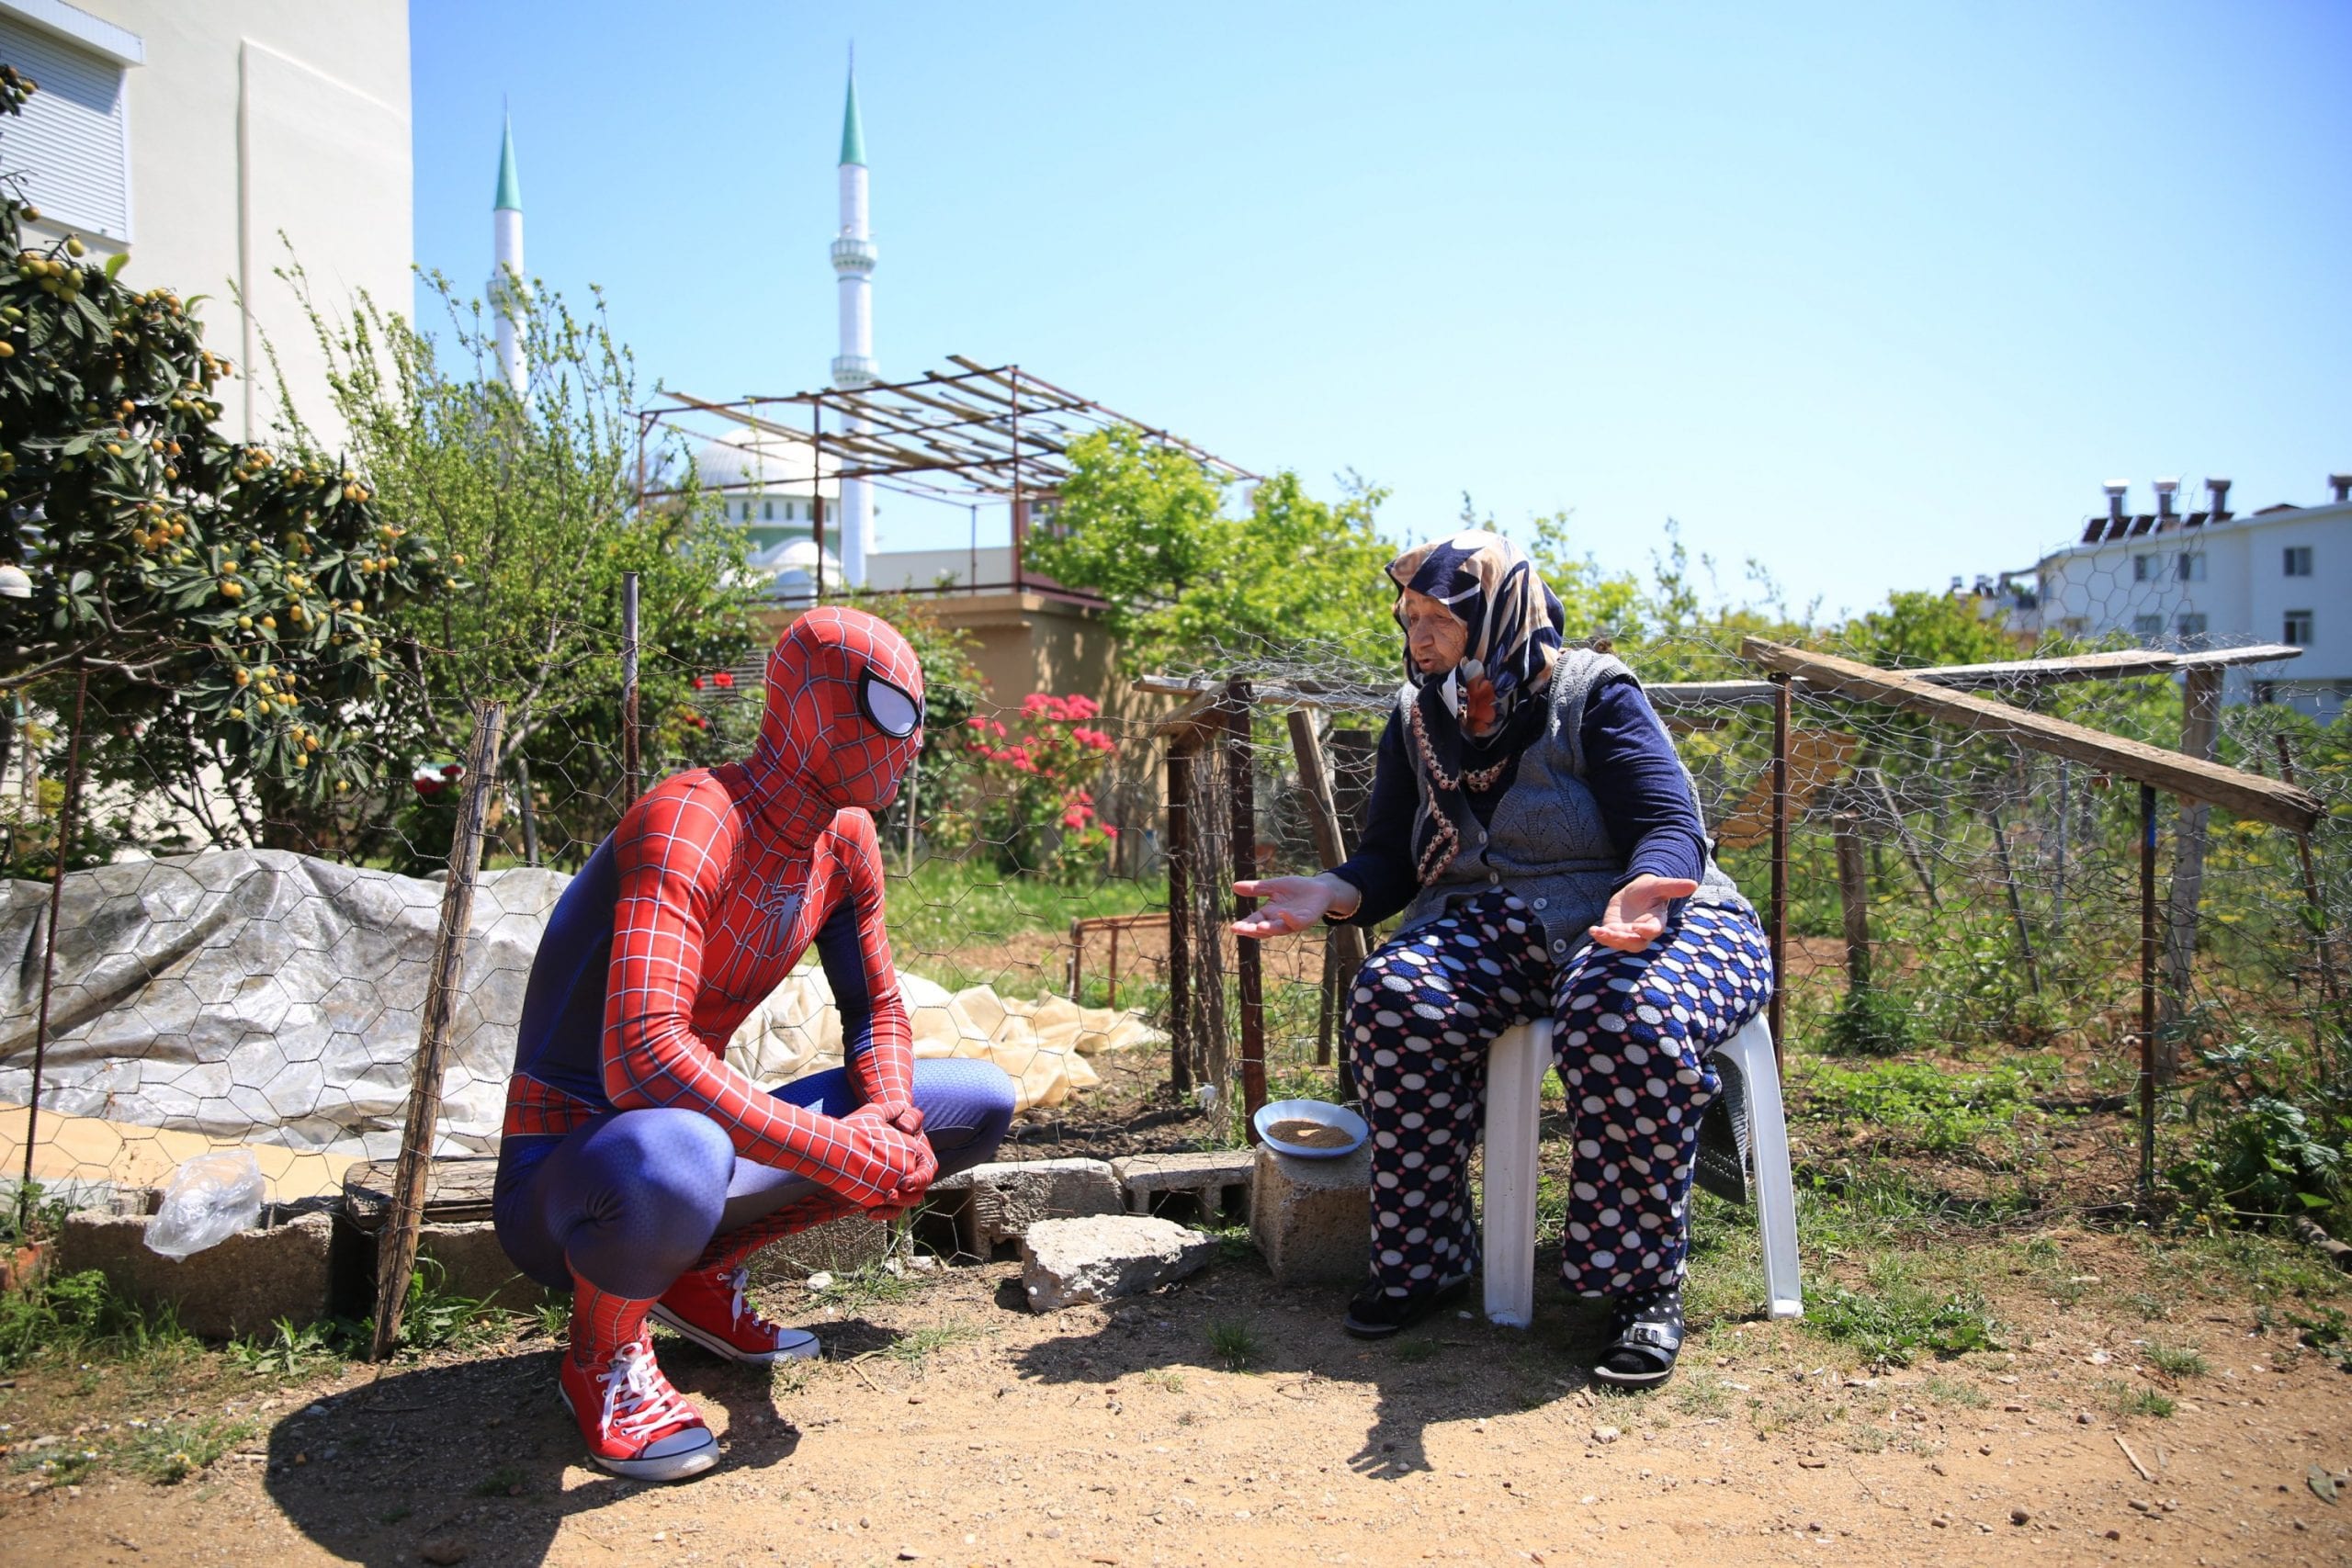 Real Spider-man helps citizens with their groceries in Turkey&#8217;s Antalya